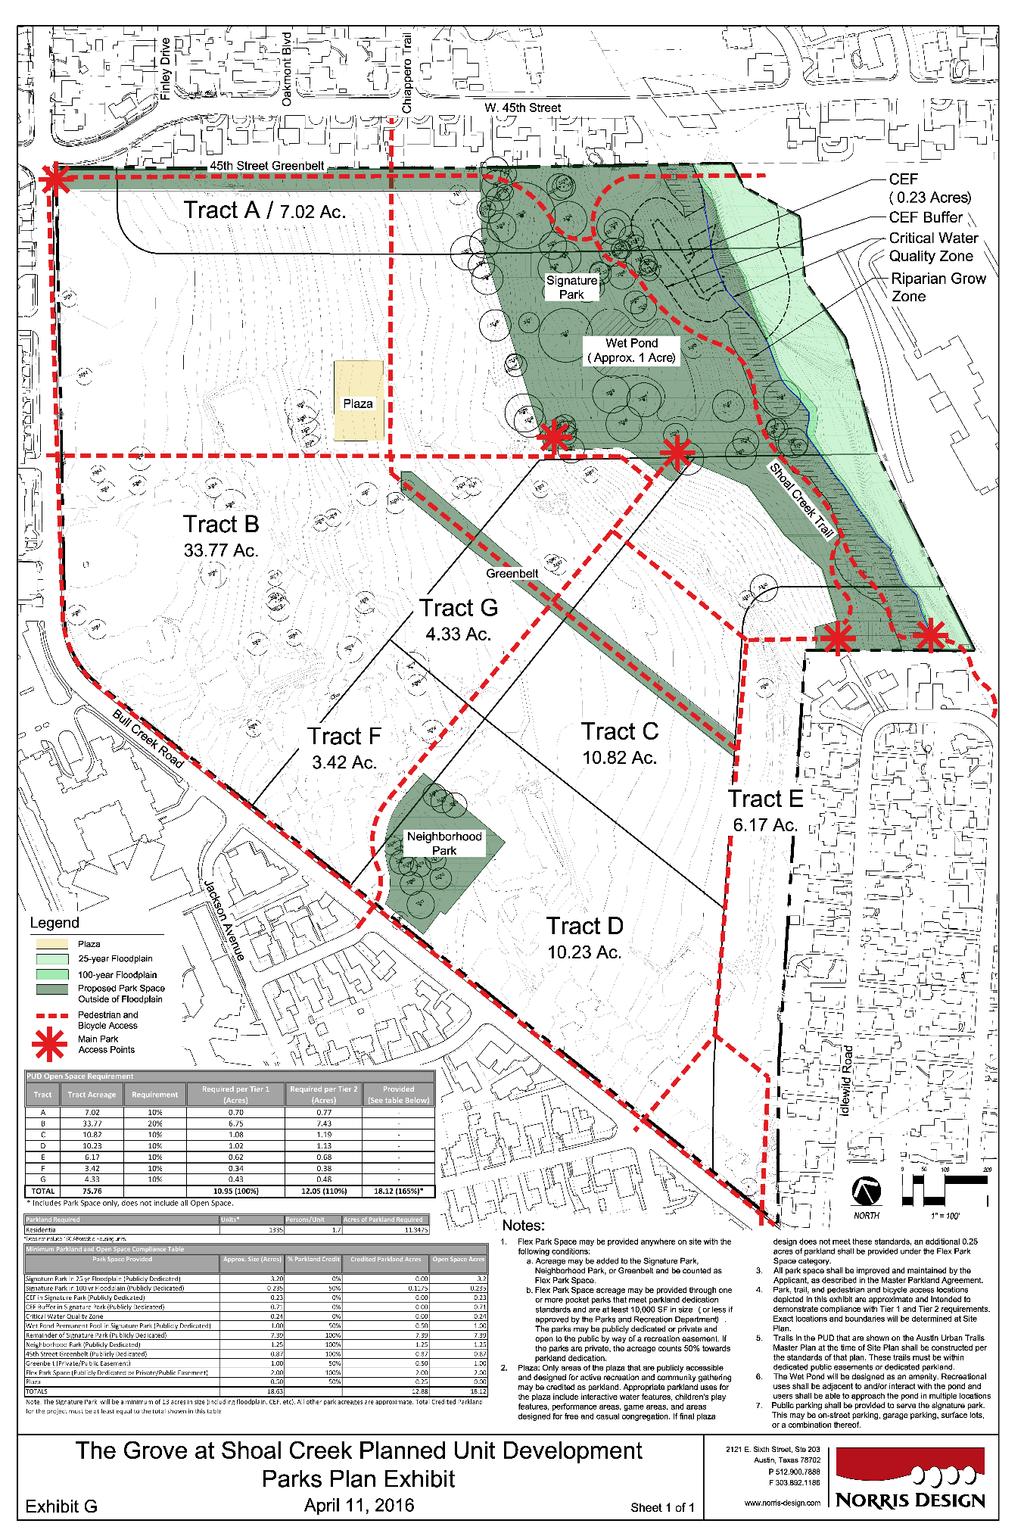 Developer s Parks Plan Amended & Annotated 0.